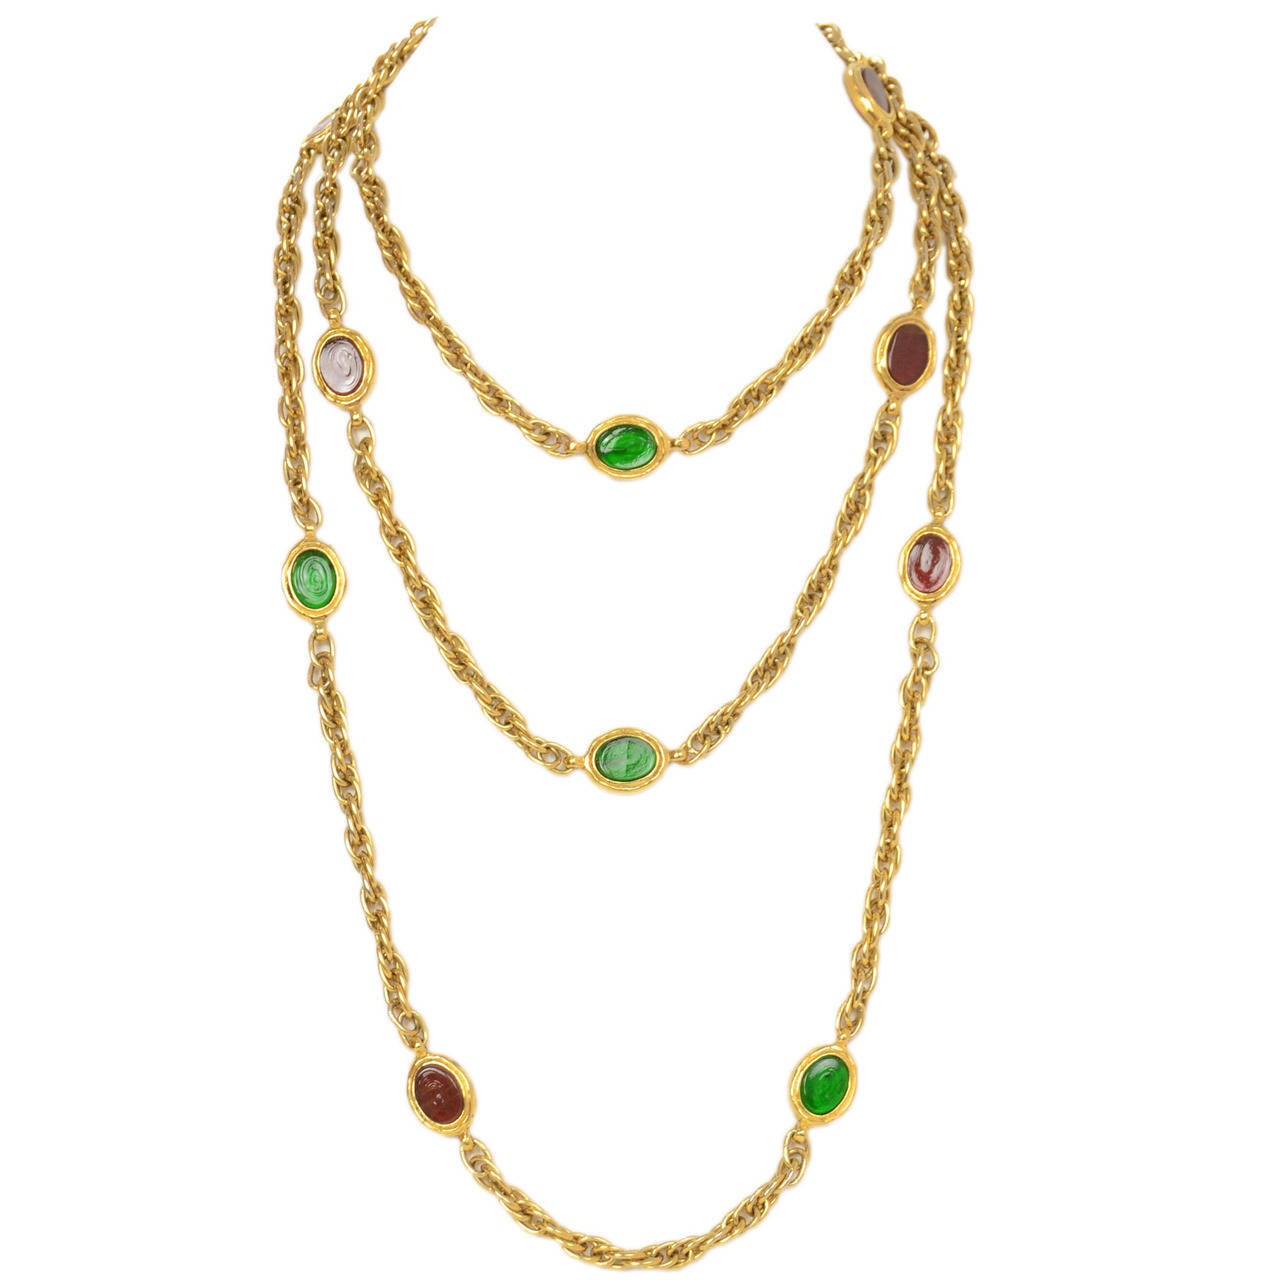 Chanel Vintage '70s-'80s Red & Green Gripoix Gold Necklace

Made in: France
Year of Production: 1970's-1980's
Closure: Jump ring
Color: Gold, red and green
Materials: Metal and glass
Overall Condition: Excellent with no signs of wear or